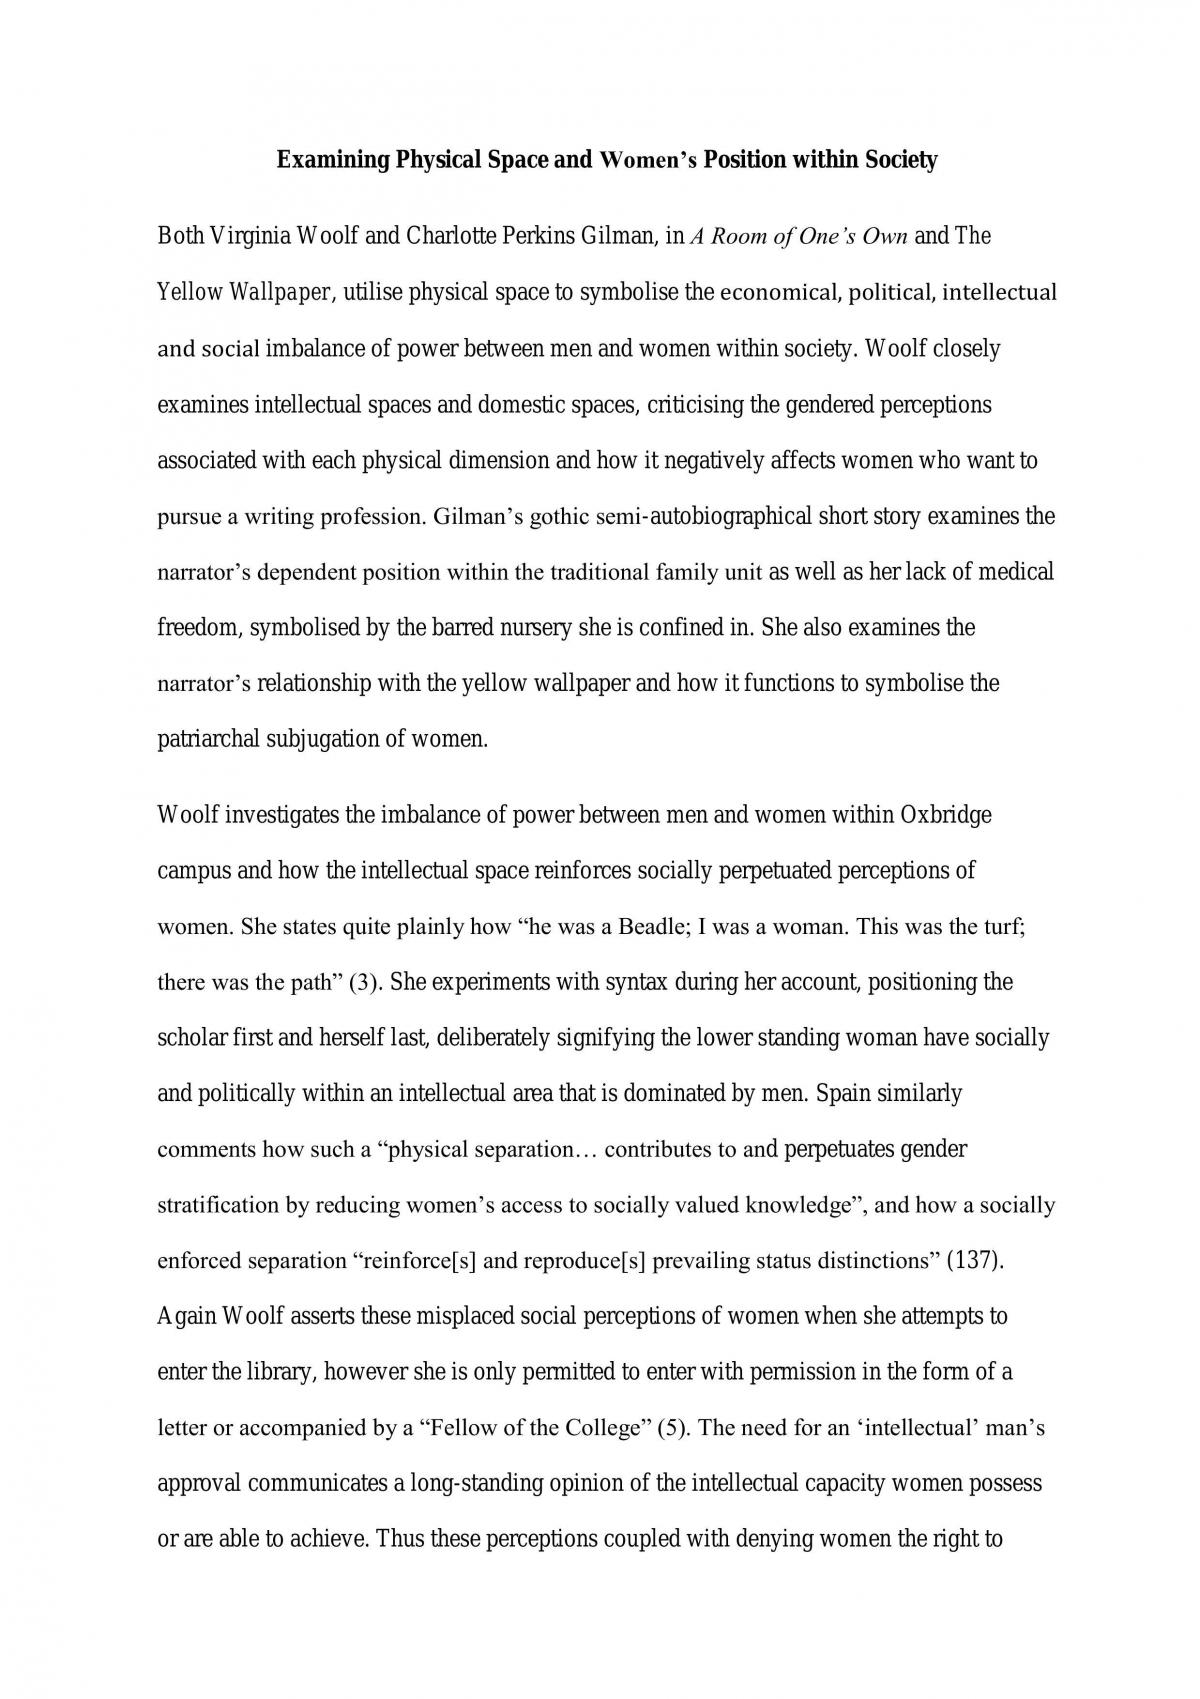 Examining Physical Space and Women’s Position within Society - Page 1